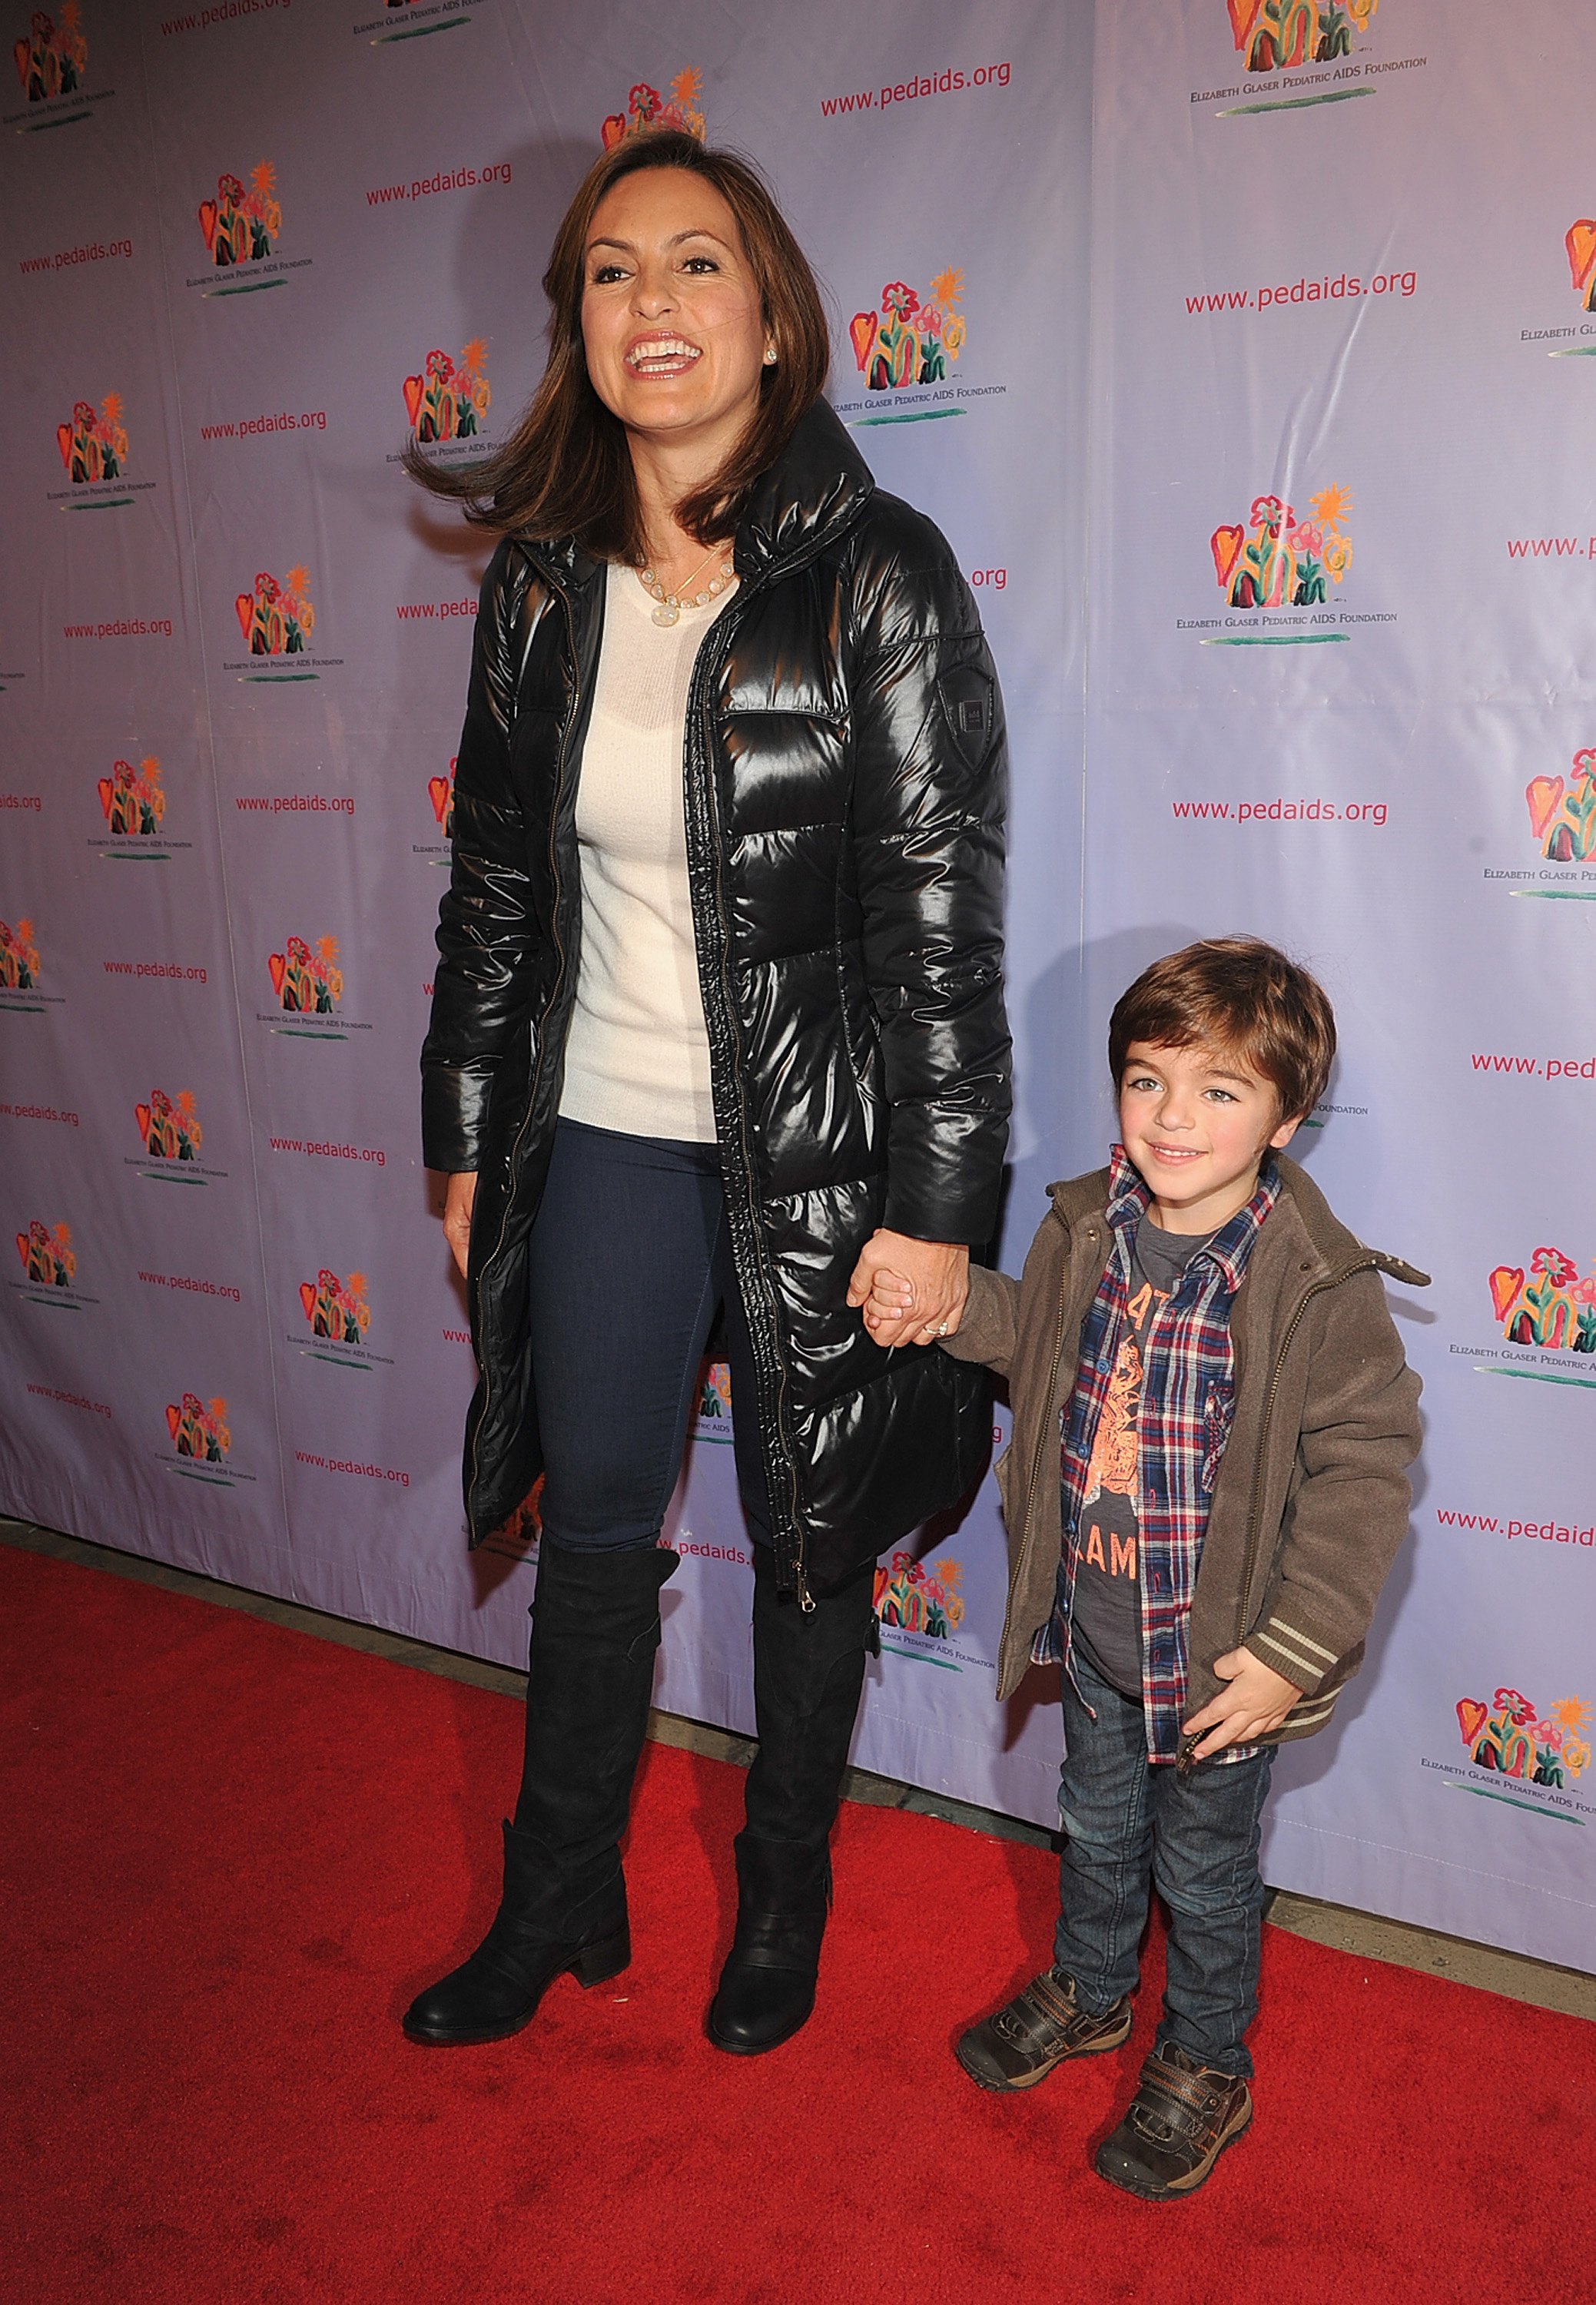 Mariska Hargitay and August Miklos Friedrich Hermann at a Elizabeth Glaser Pediatric AIDS Foundation family event in New York City on November 6, 2010 | Source: Getty Images